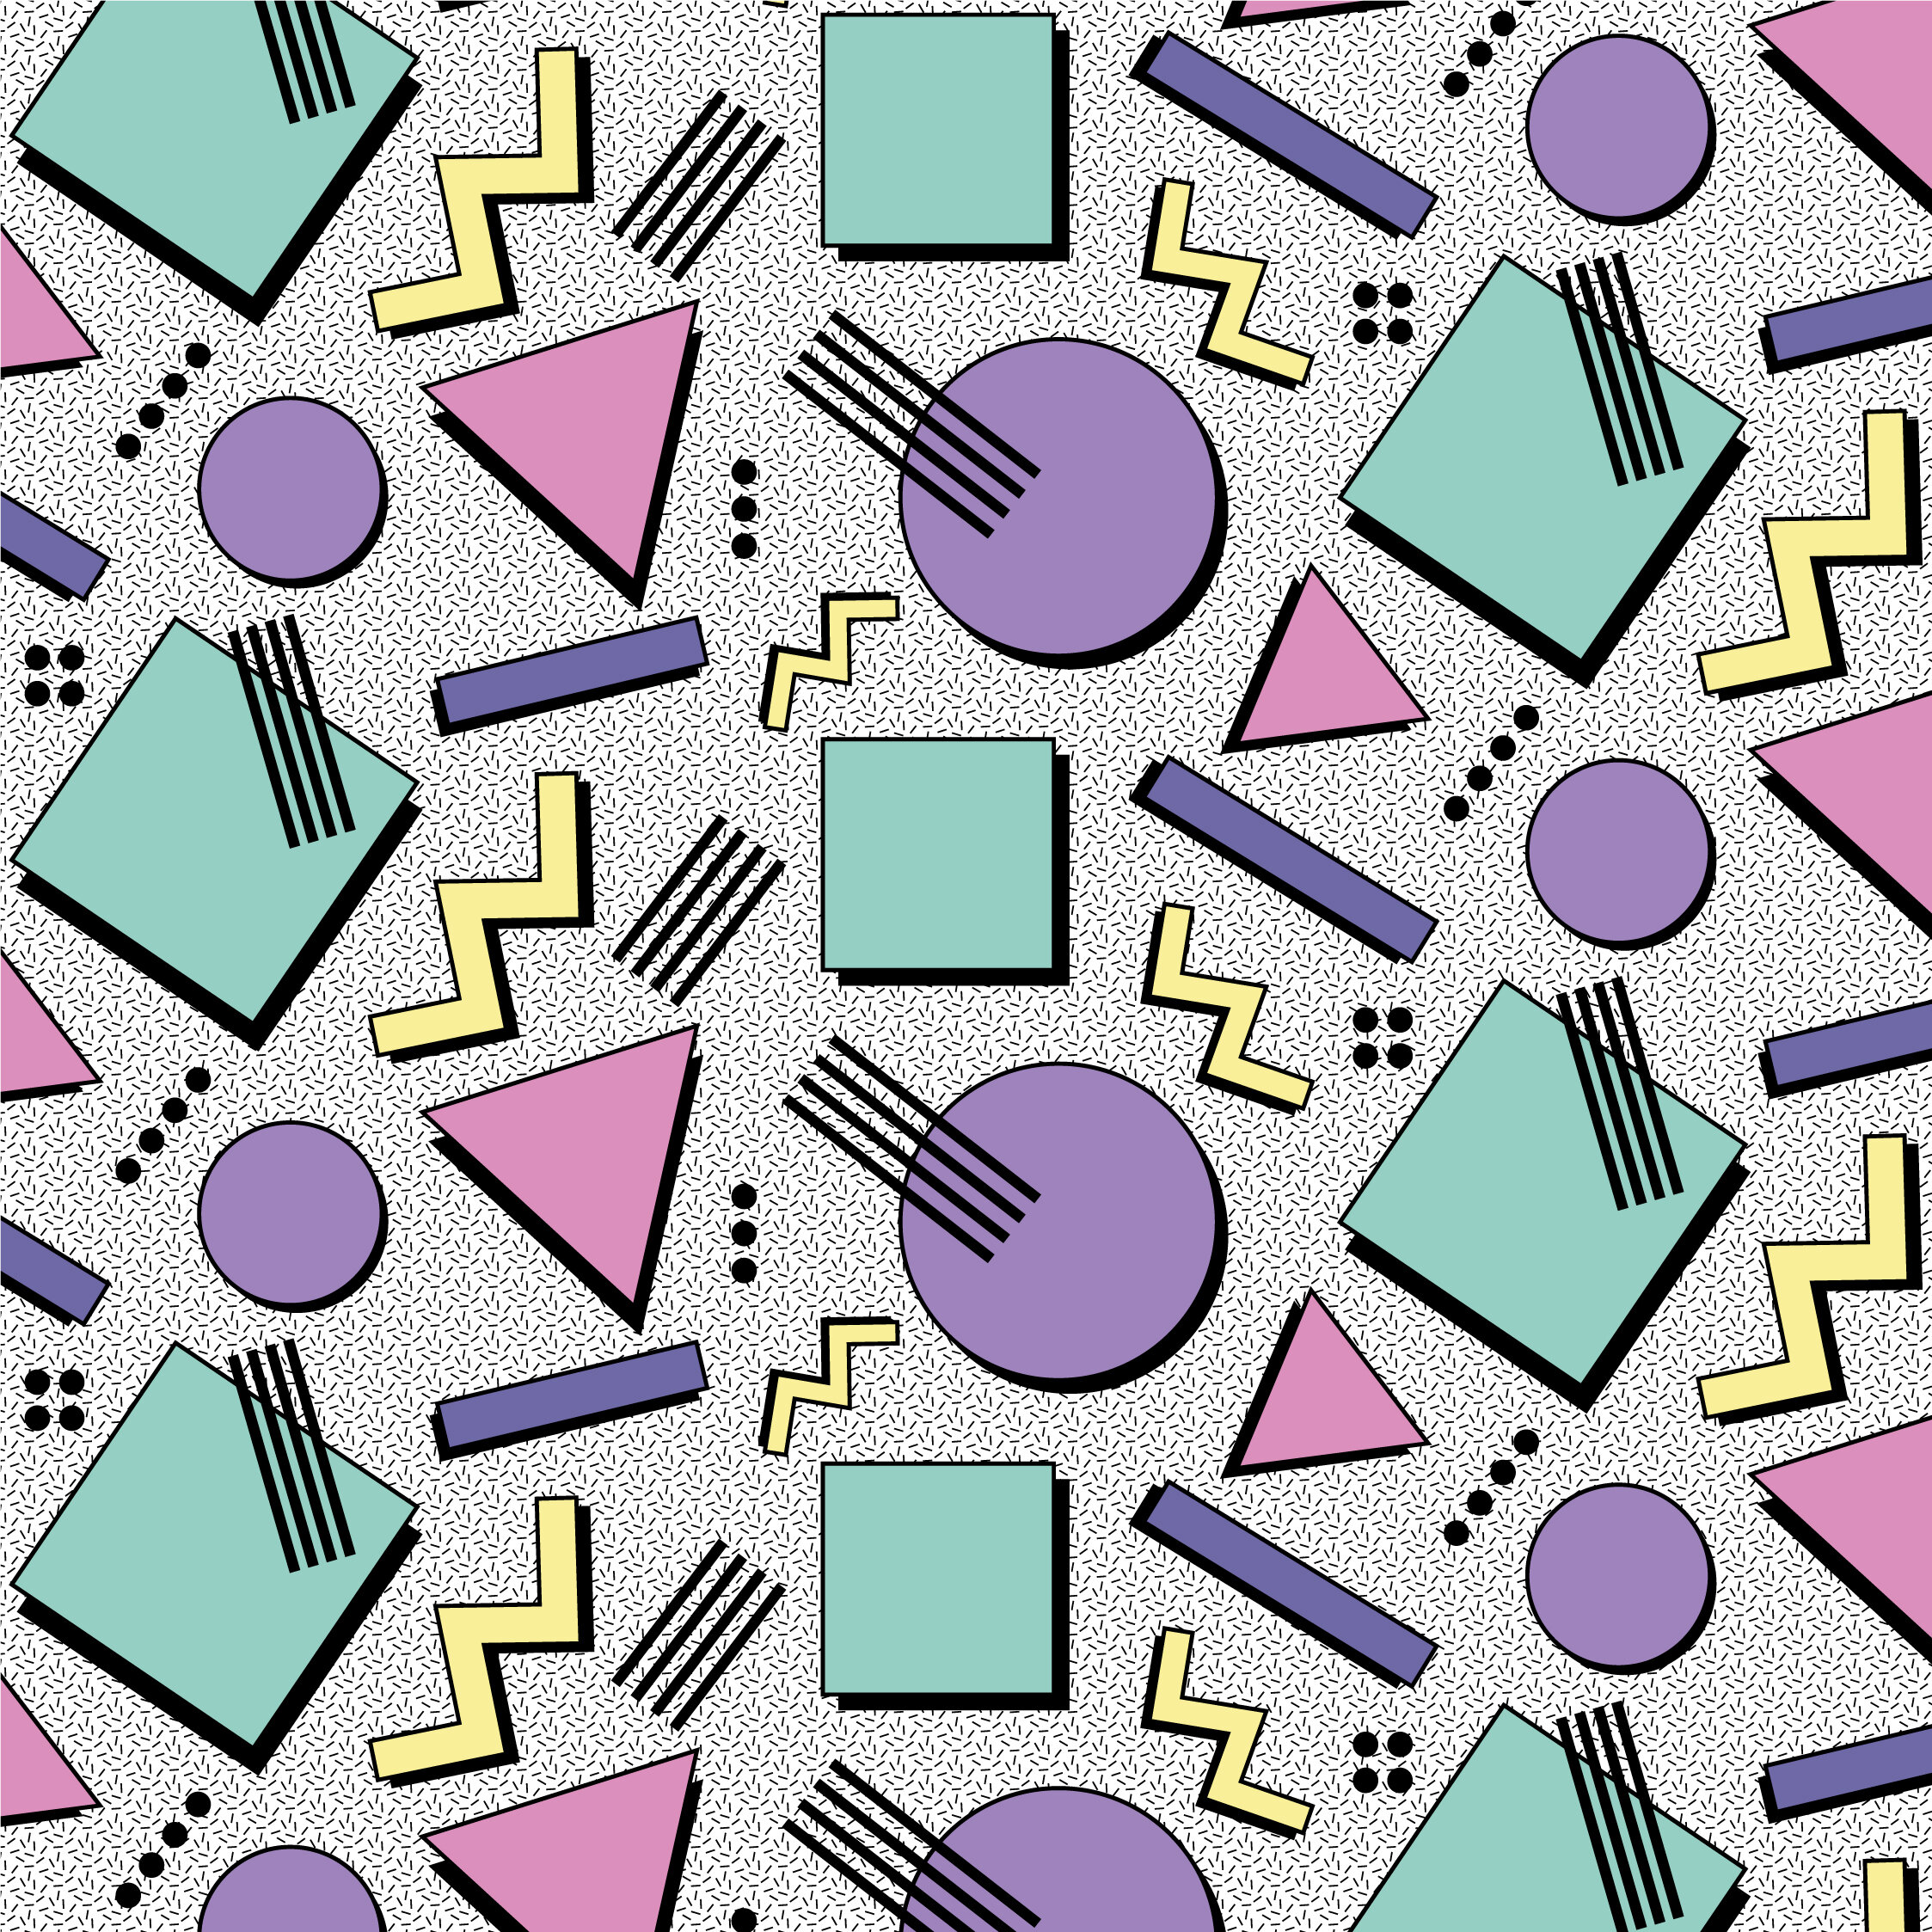 Pattern Design — Emma Colwell